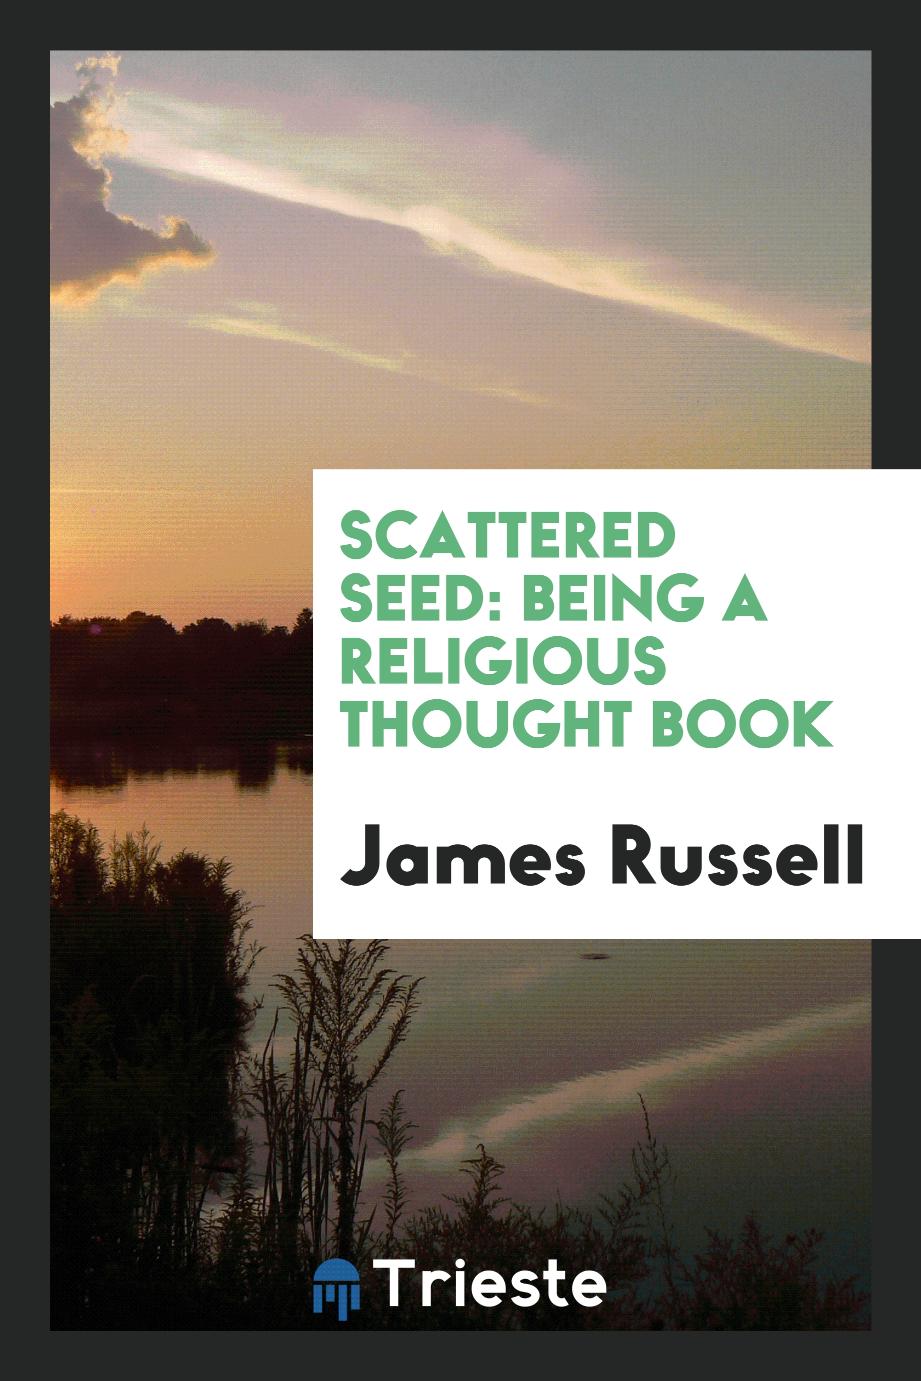 Scattered Seed: Being a Religious Thought Book